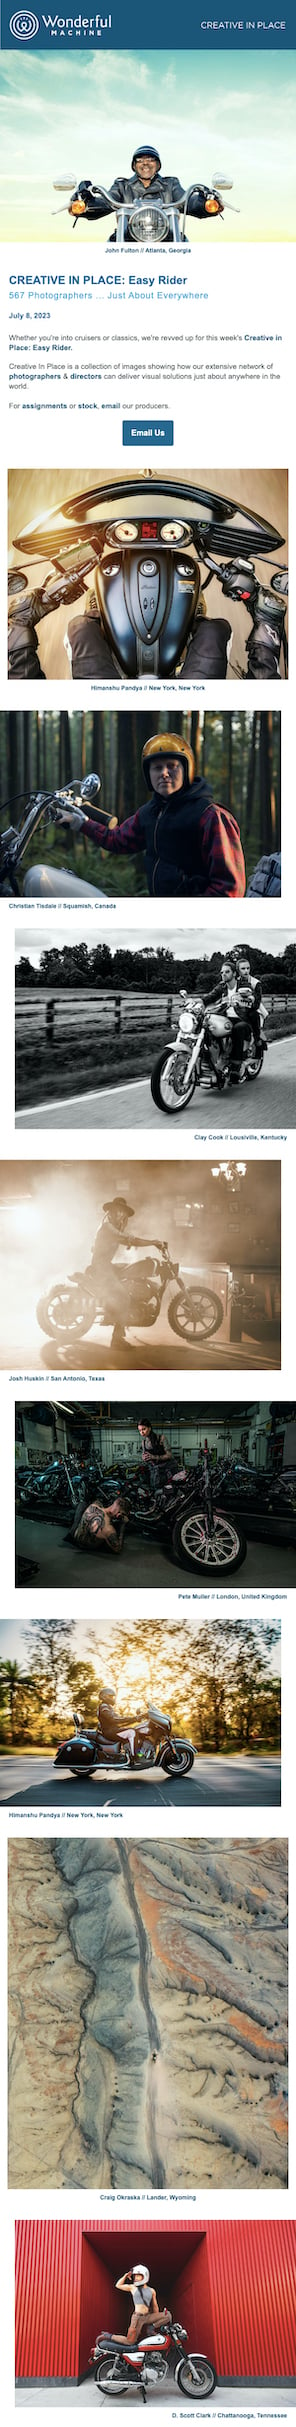 Creative in Place: Easy Rider emailer